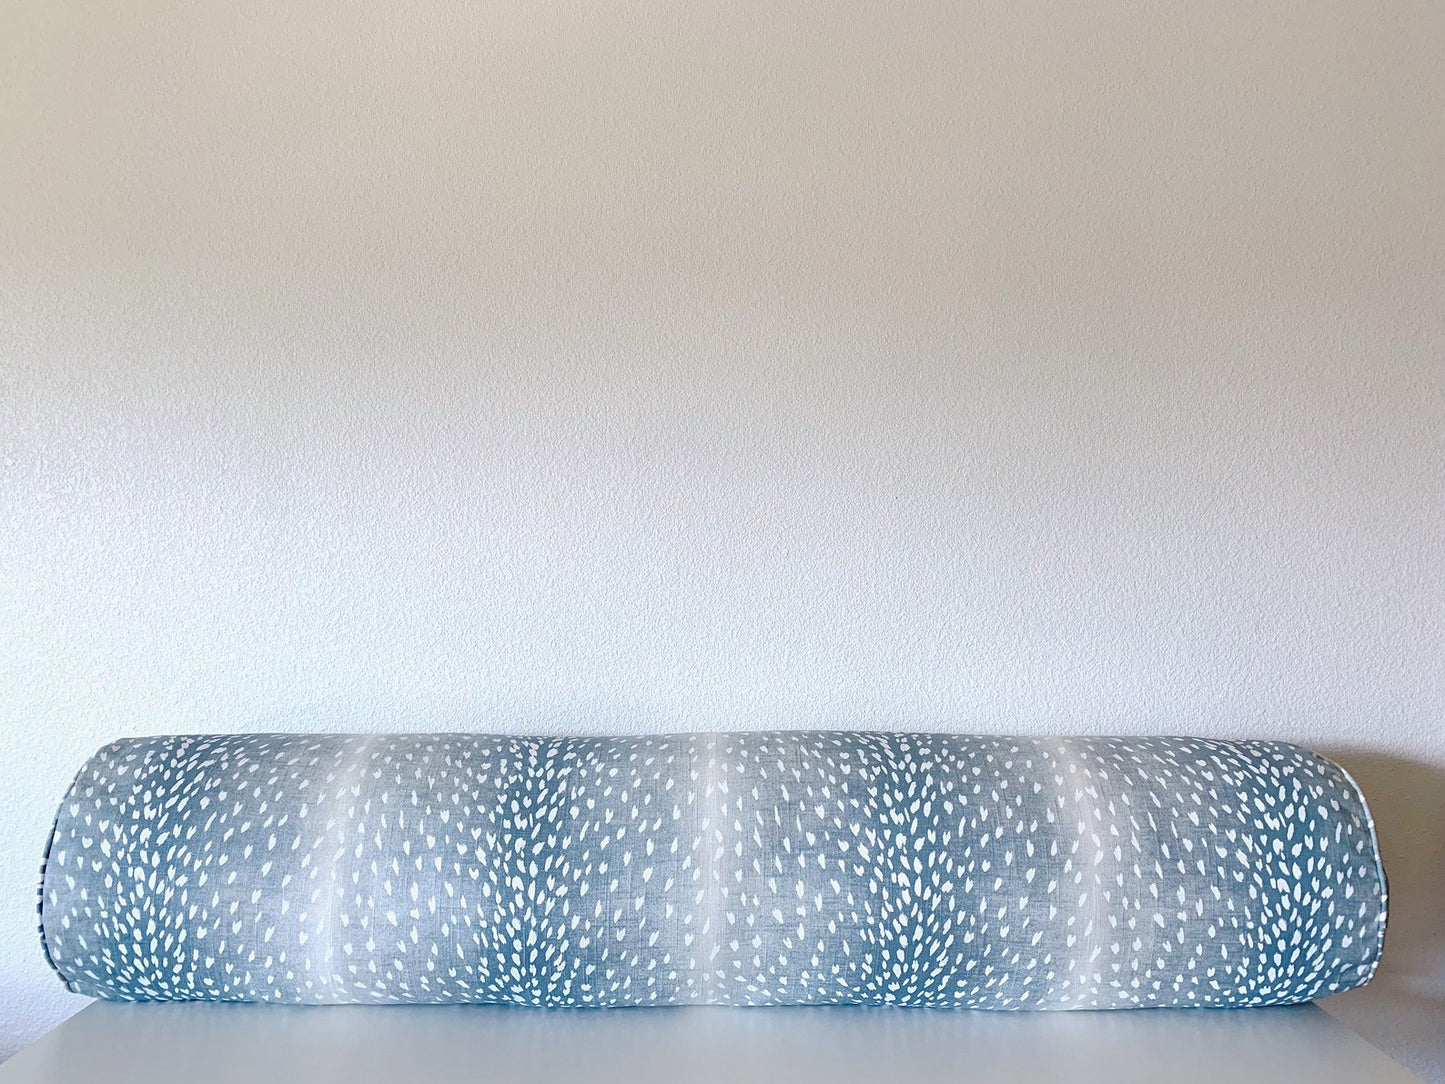 Authentic Vern Yip Antelope Pillow Cover in Aqua Blue - Available in Bolster, Throw, Lumbar, and Euro Sham Cover Sizes